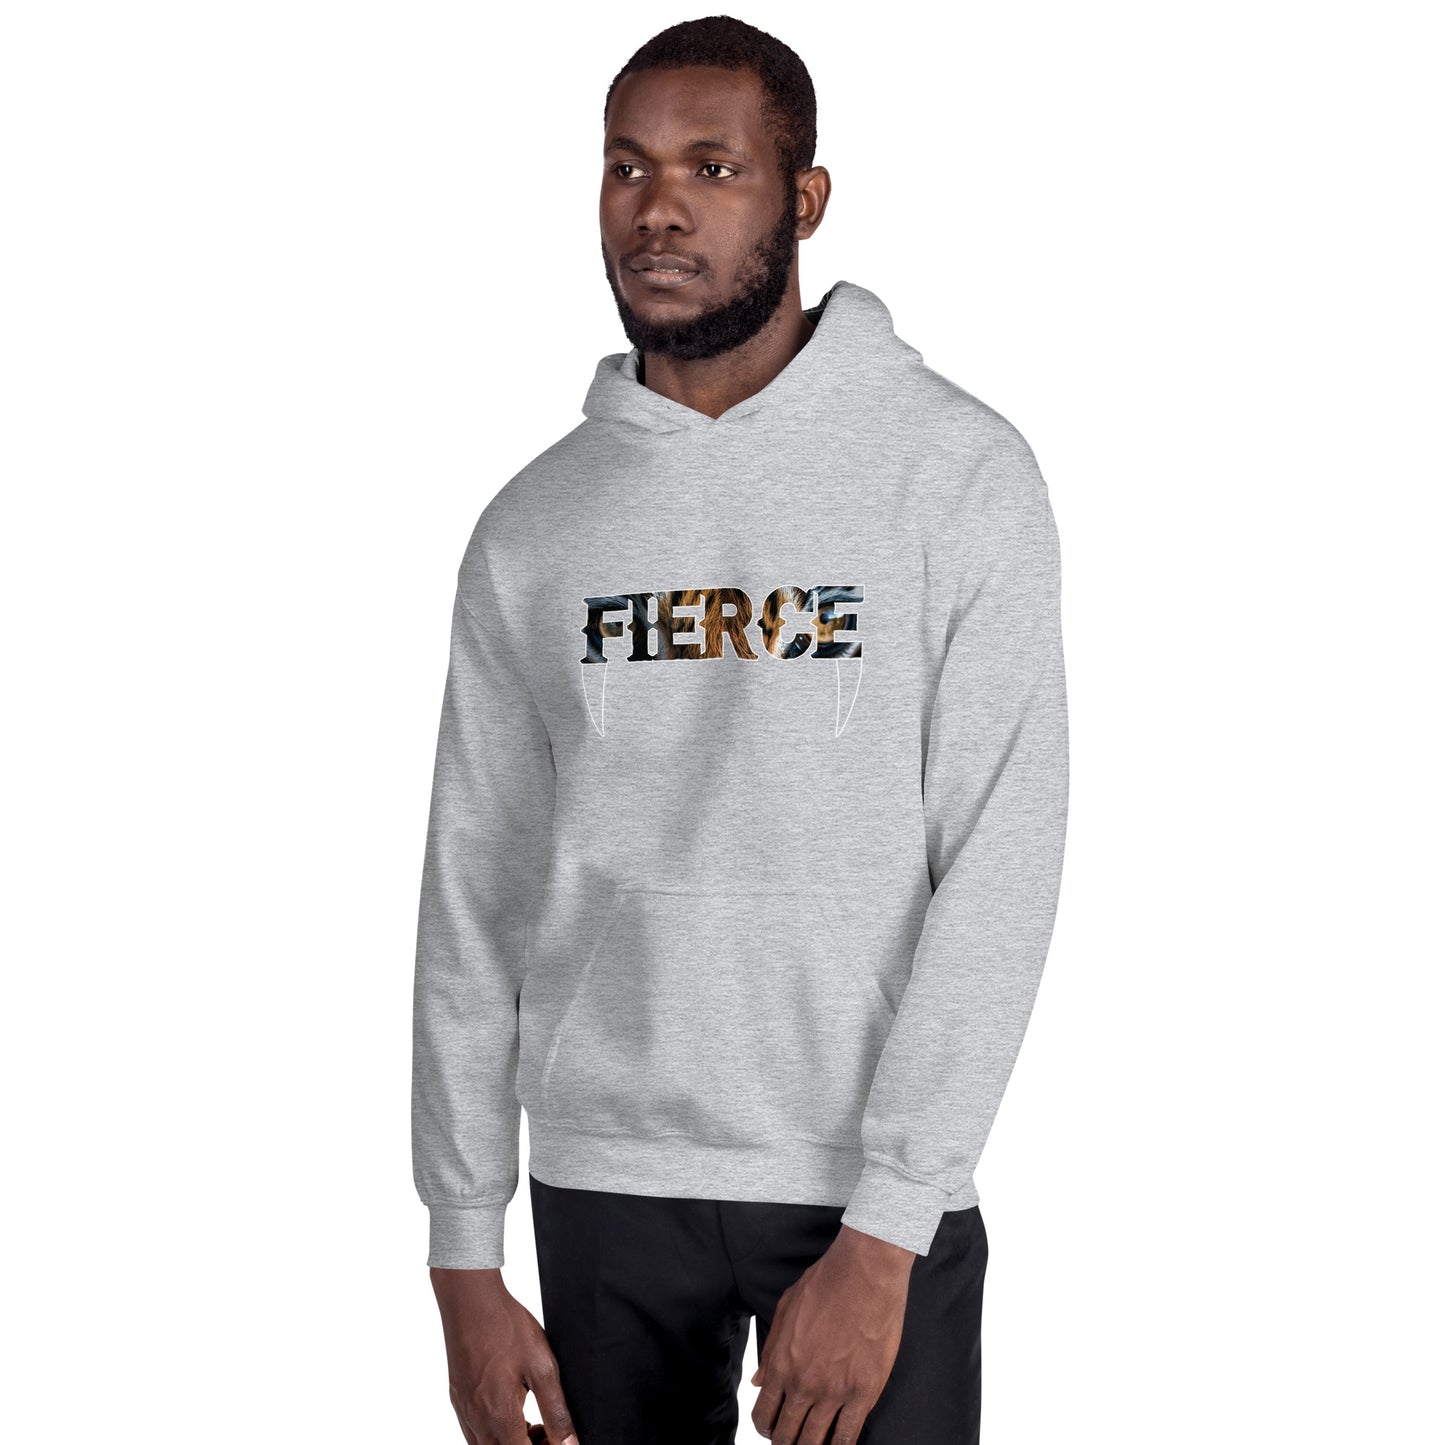 FIERCE - Do NOT Mess with Me or Mine Unisex Hoodie